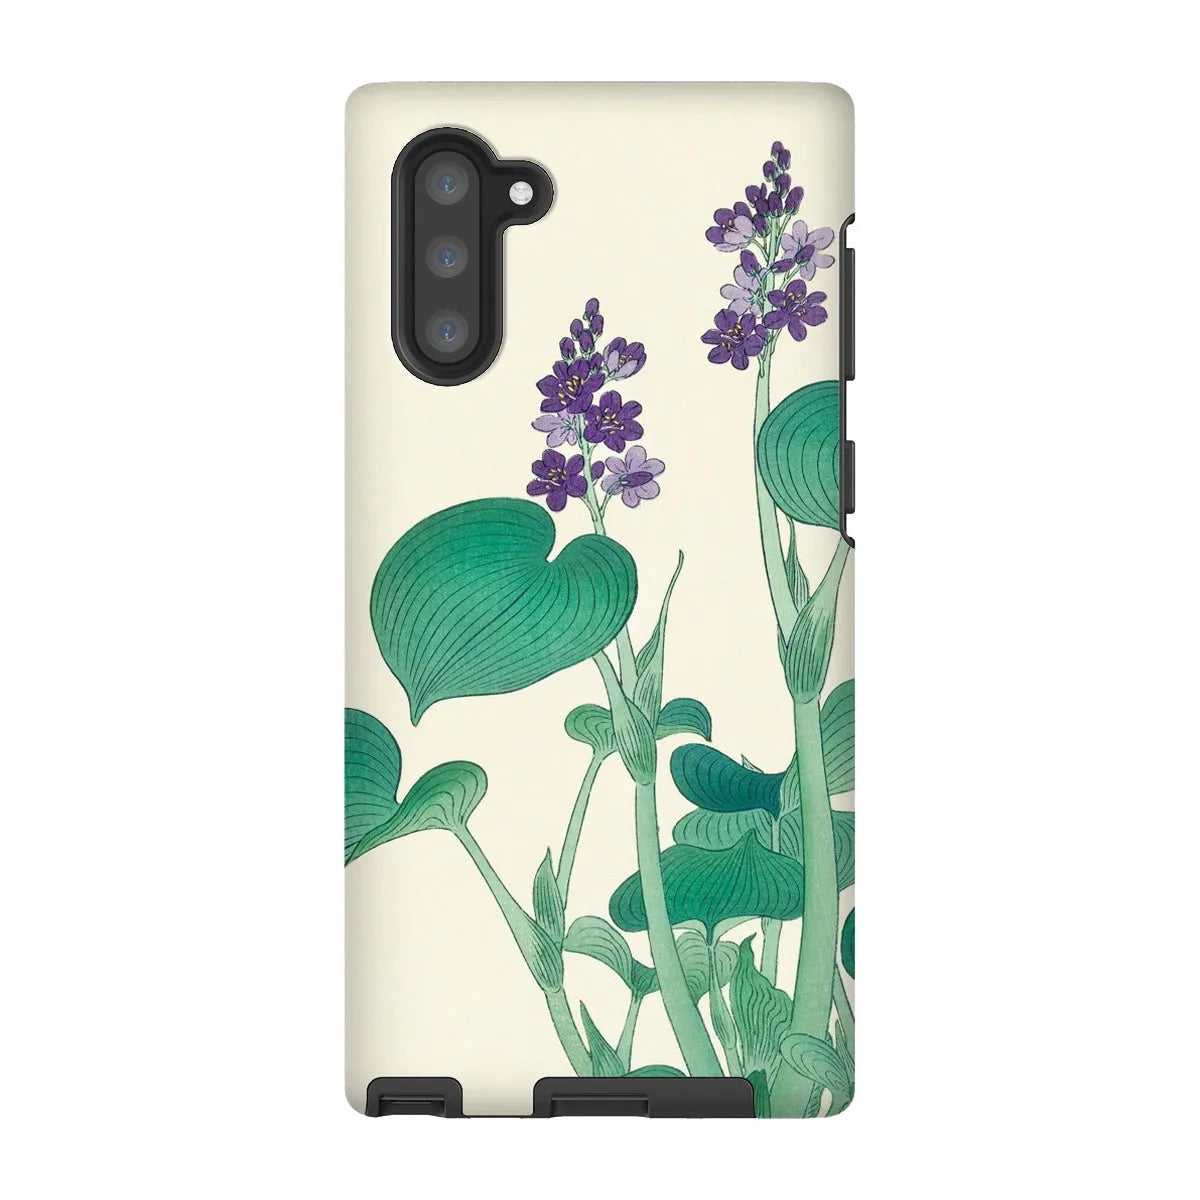 Blooming Hosta - Floral Aesthetic Art Phone Case - Ohara Koson - Samsung Galaxy Note 10 / Matte - Mobile Phone Cases